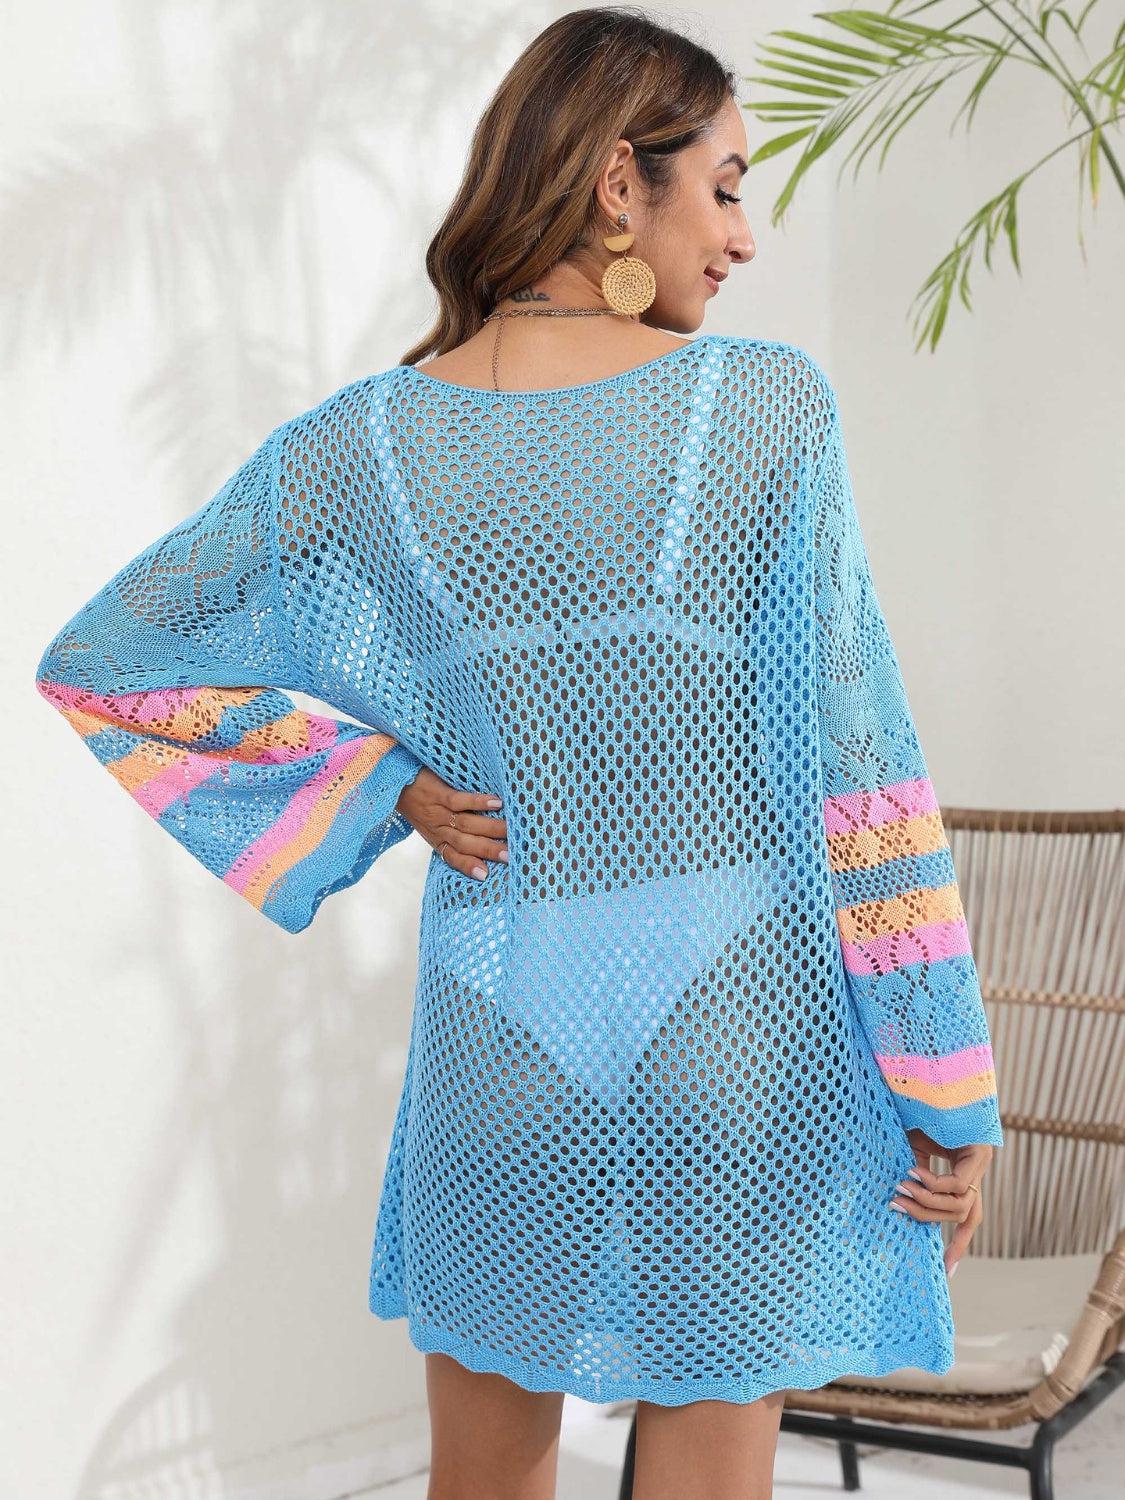 a woman wearing a blue crochet cover up